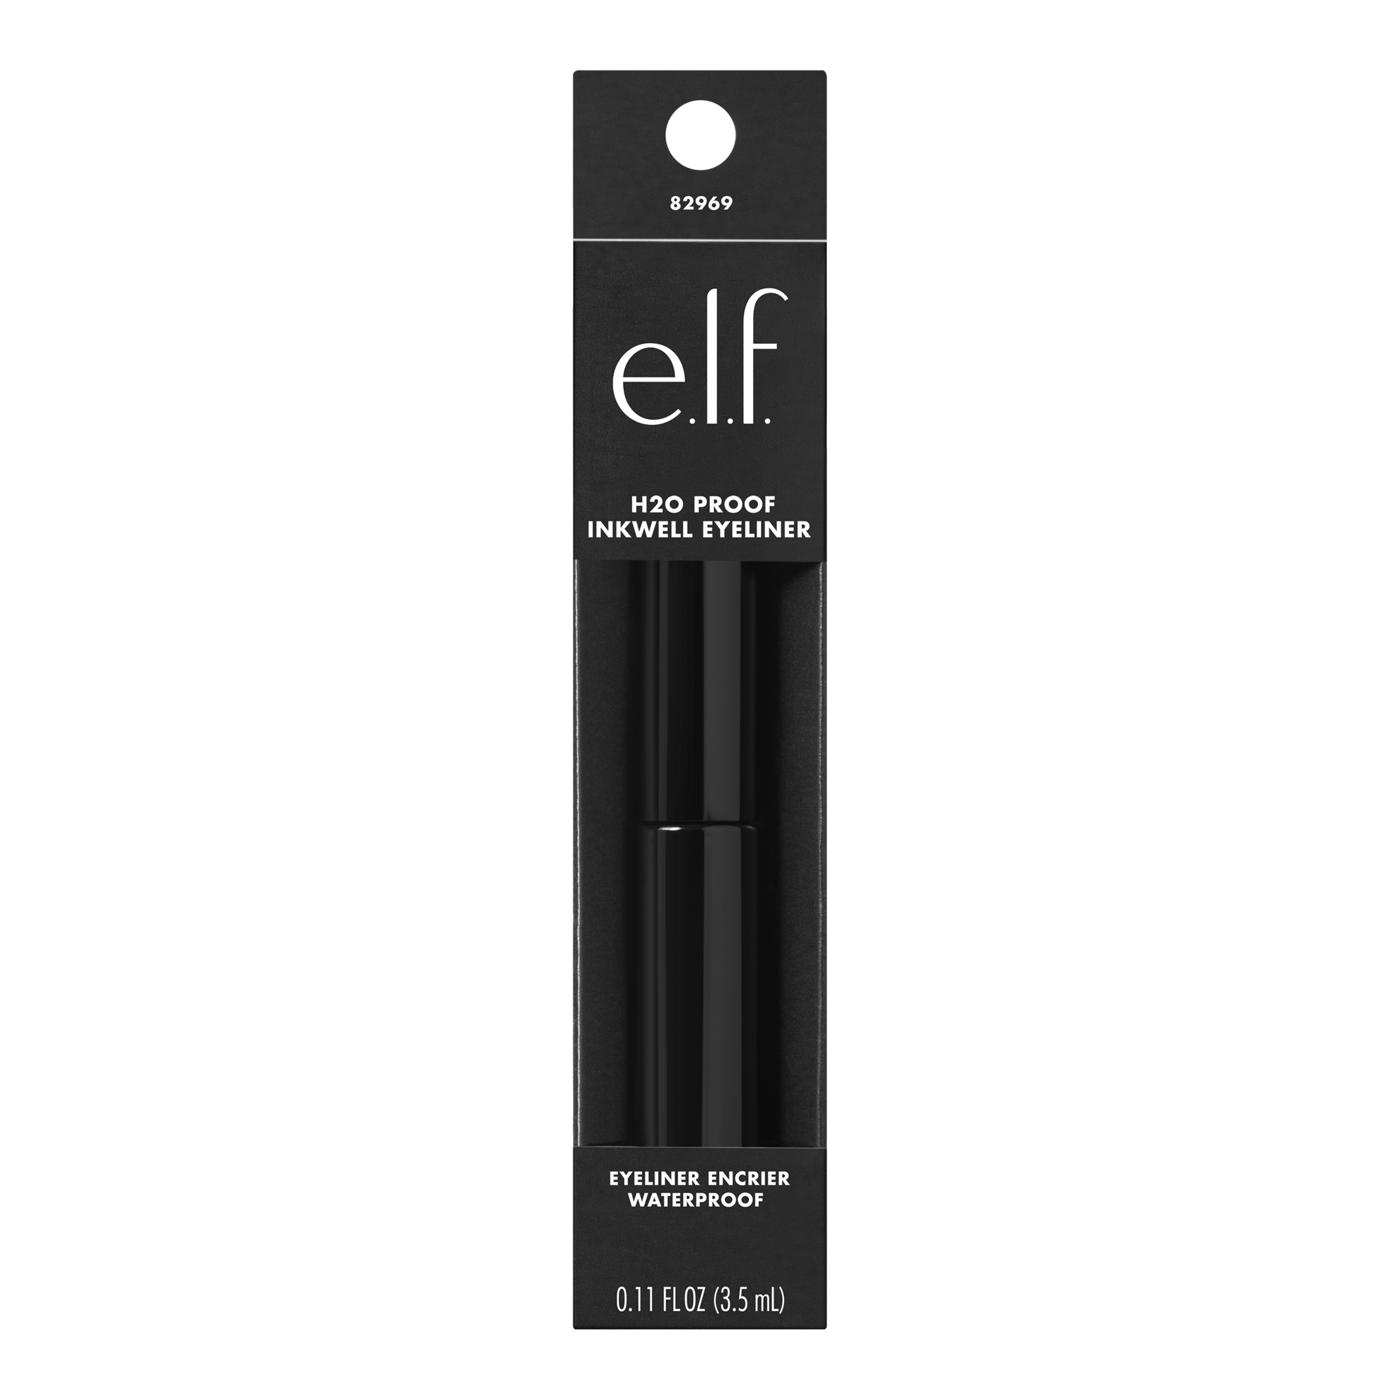 e.l.f. H2O Proof Inkwell Eyeliner; image 1 of 2